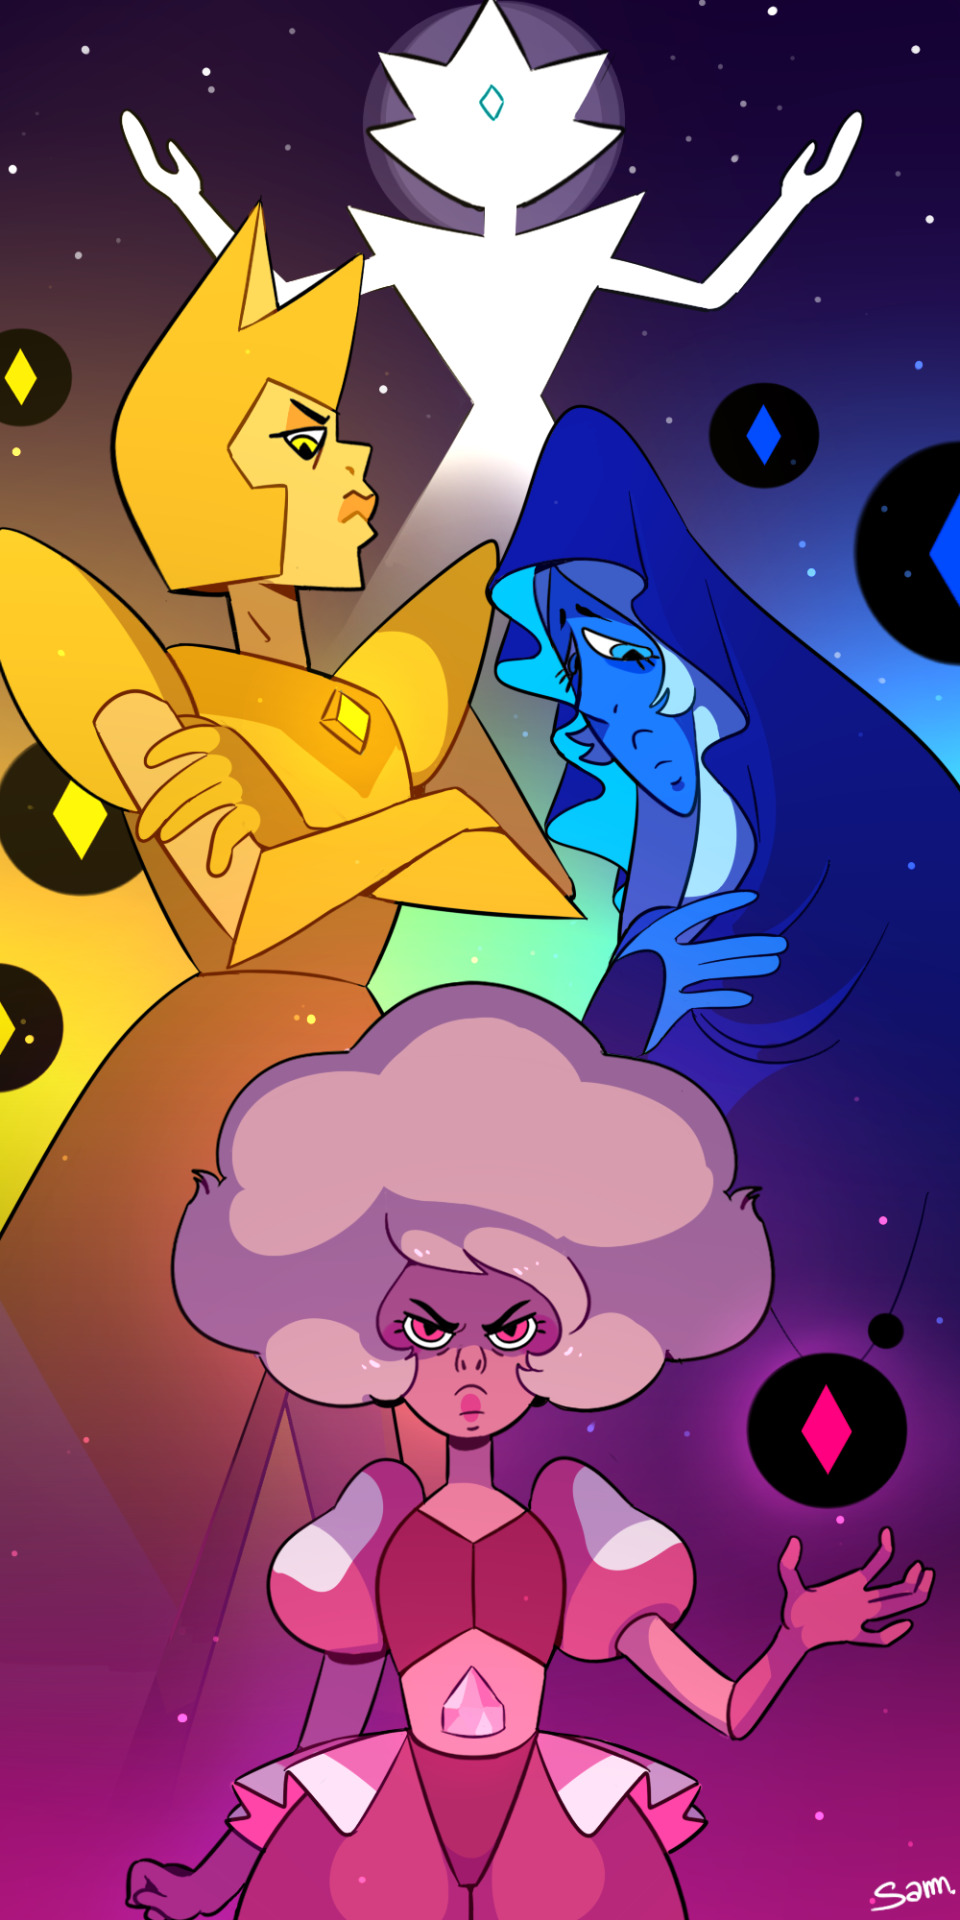 The Great Diamond Authority I’m exhausted but I finished it!